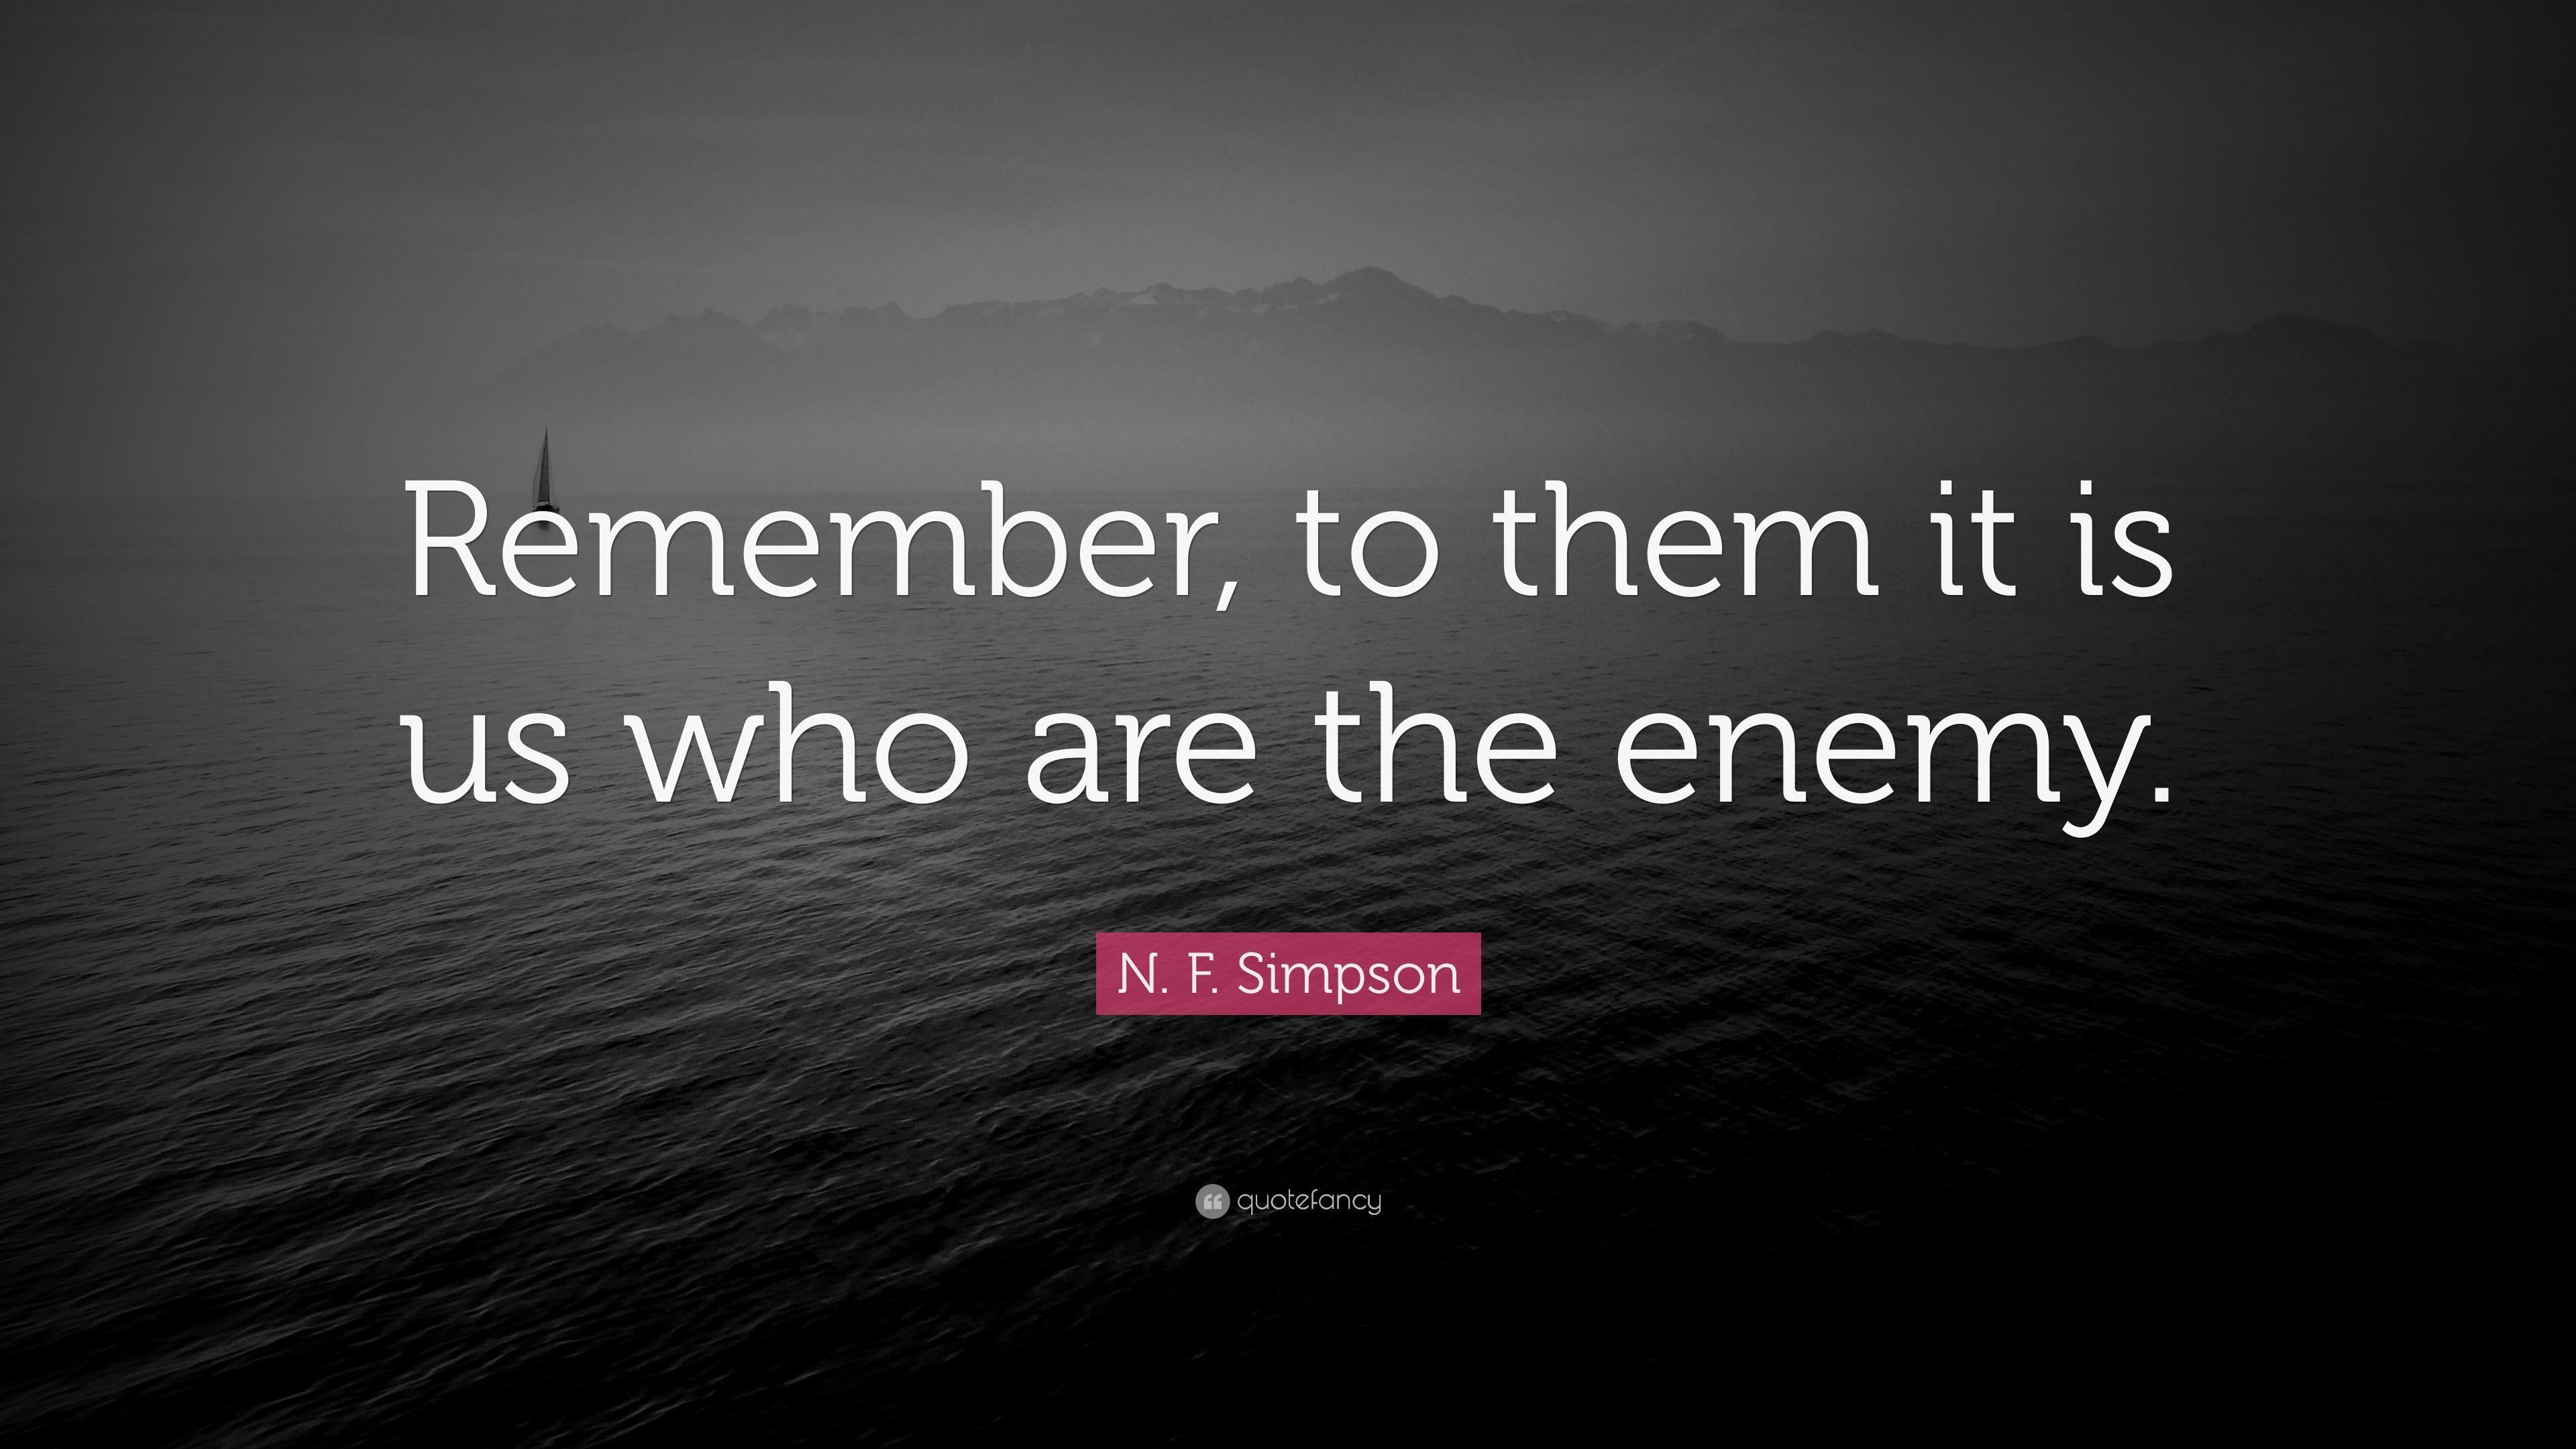 N. F. Simpson Quote: “Remember, to them it is us who are the enemy